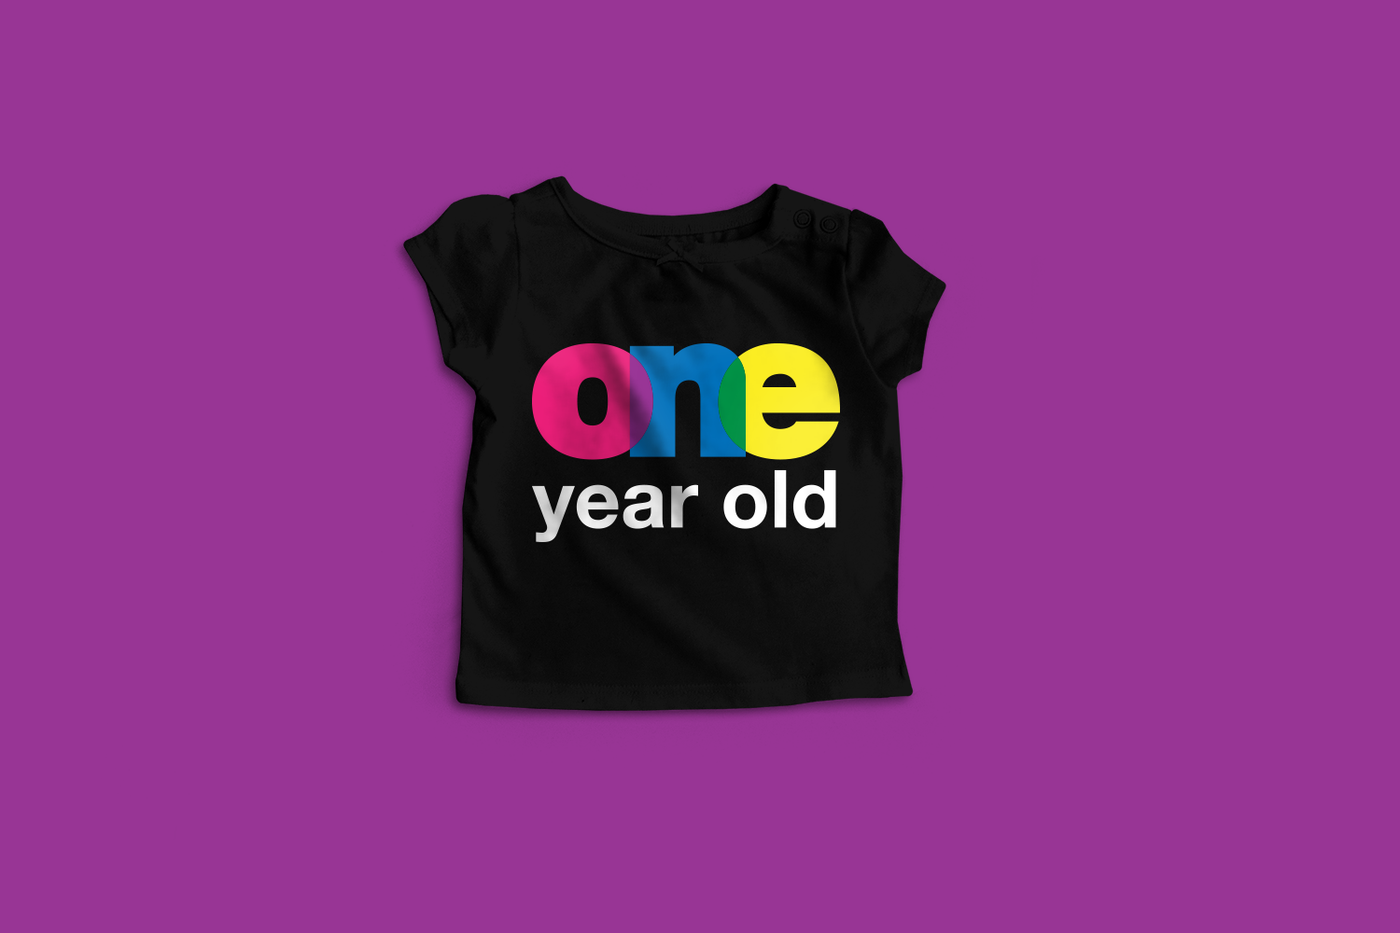 Tee that says "one year old." the letters in one overlap to form new colors